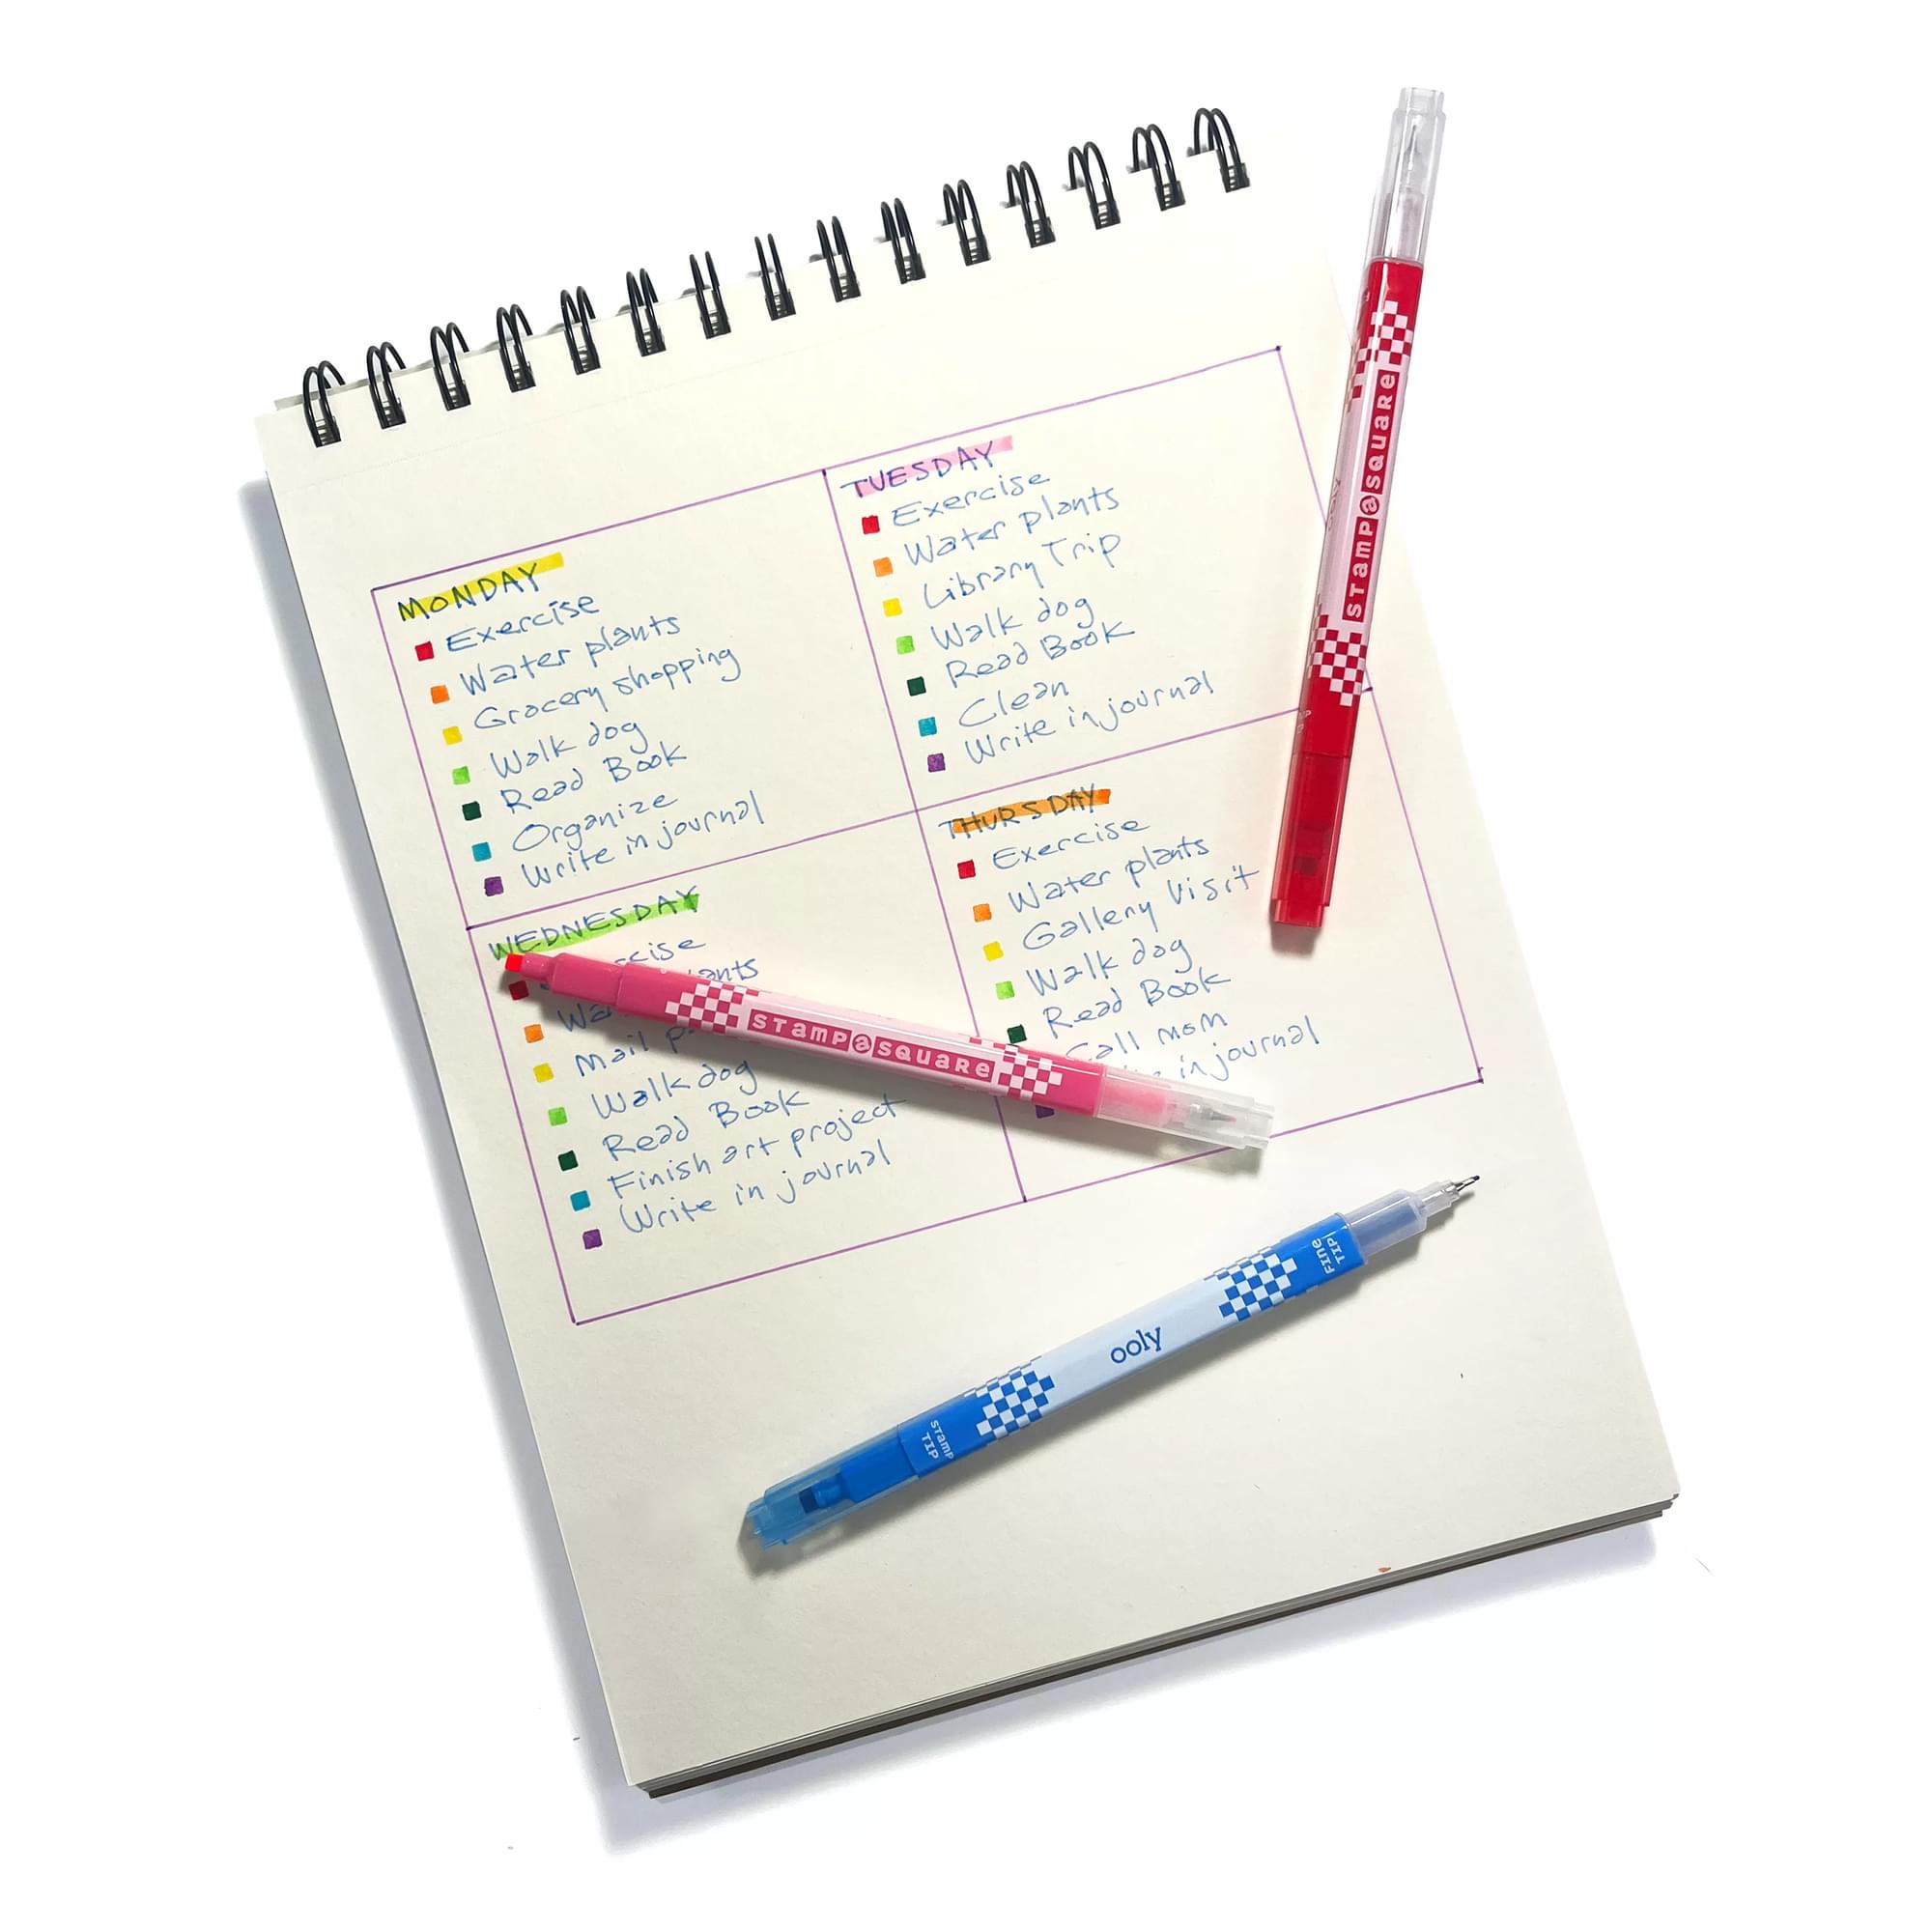 Stamp-A-Square Double Ended Markers resting on top of sketchbook with to-do list